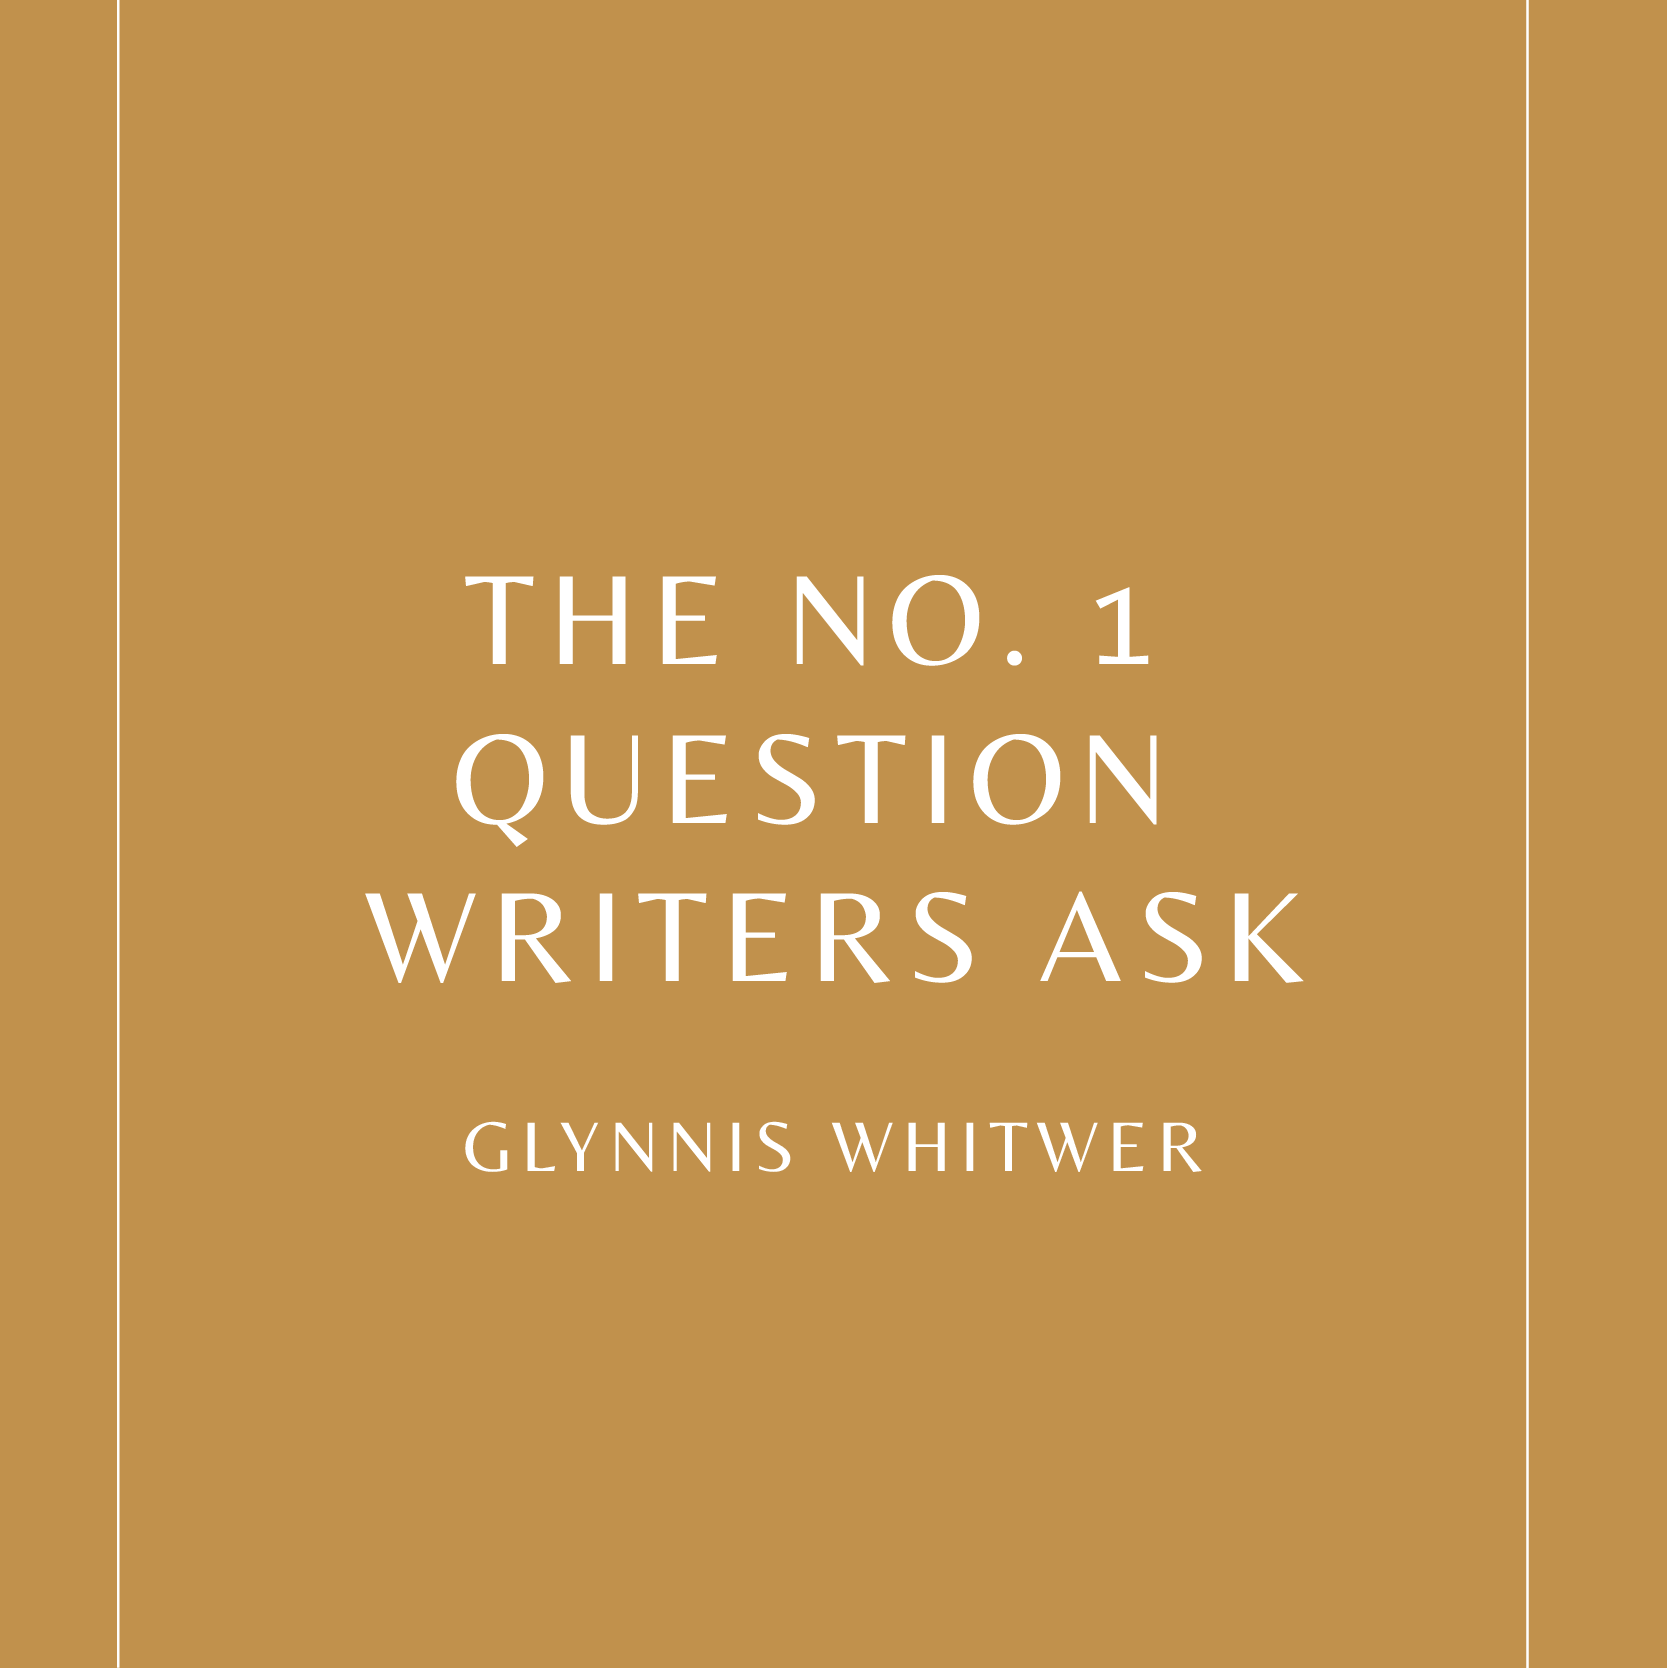 The No. 1 Question Writers Ask